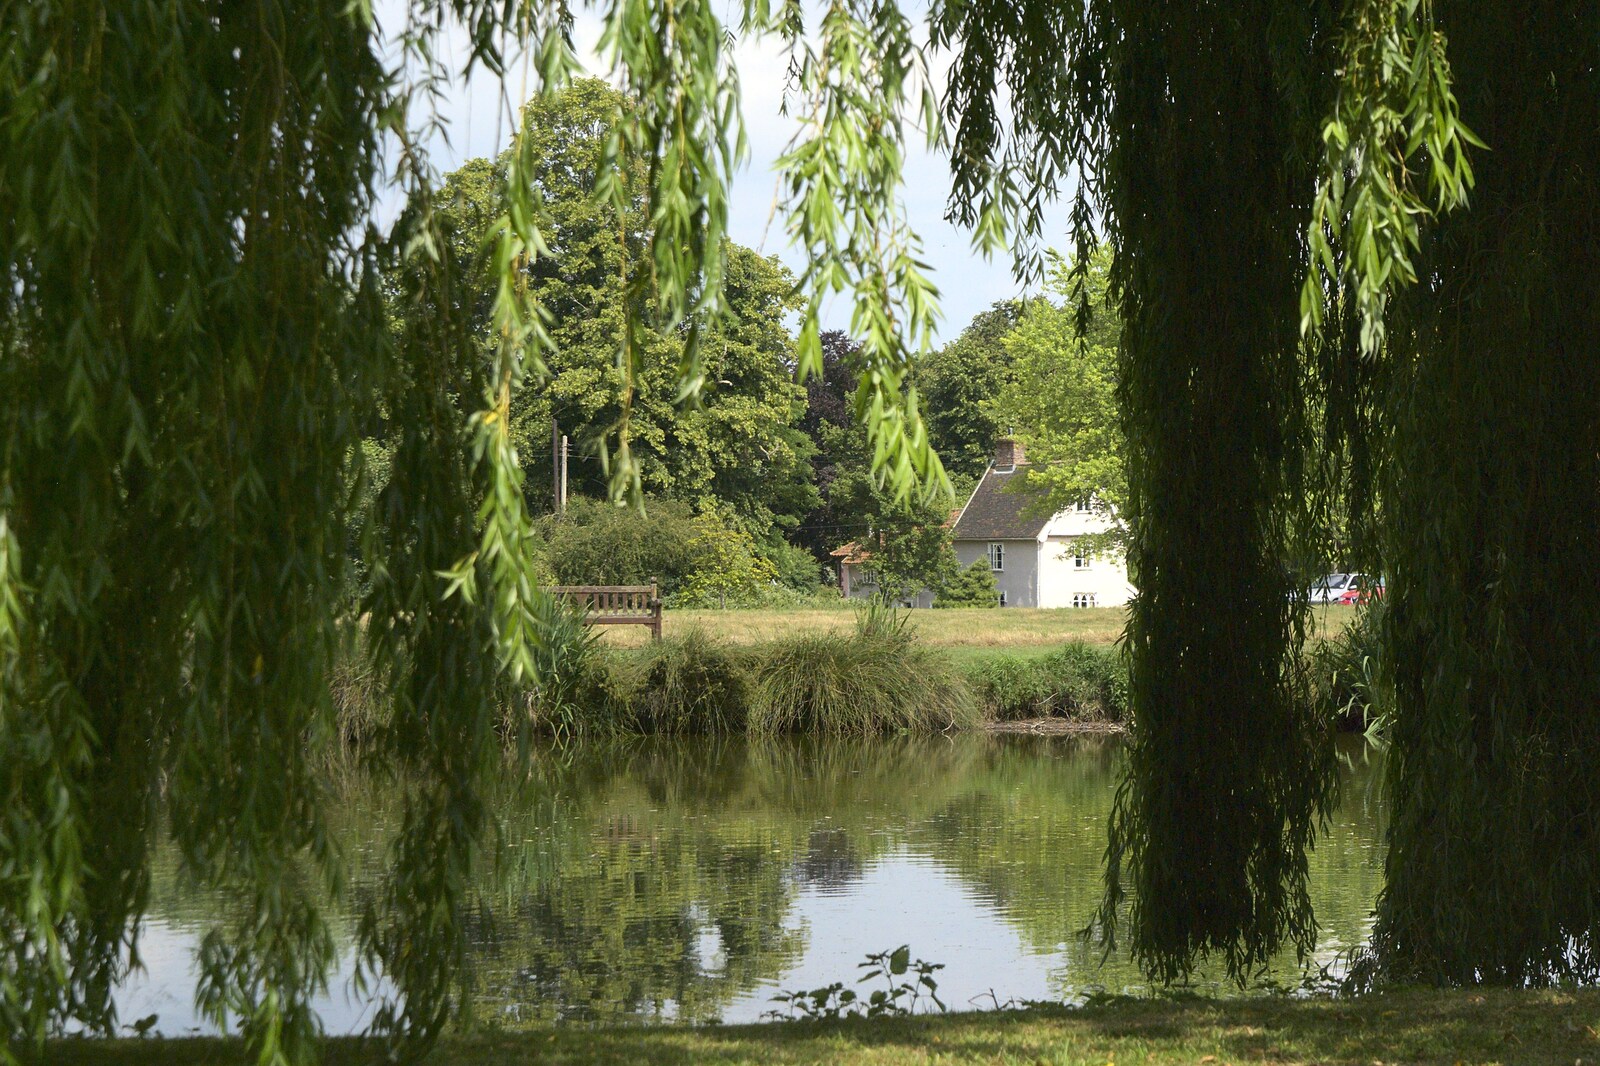 The view across the pond from Thrandeston Pig: A Hog Roast, Little Green, Thrandeston, Suffolk - 29th June 2009